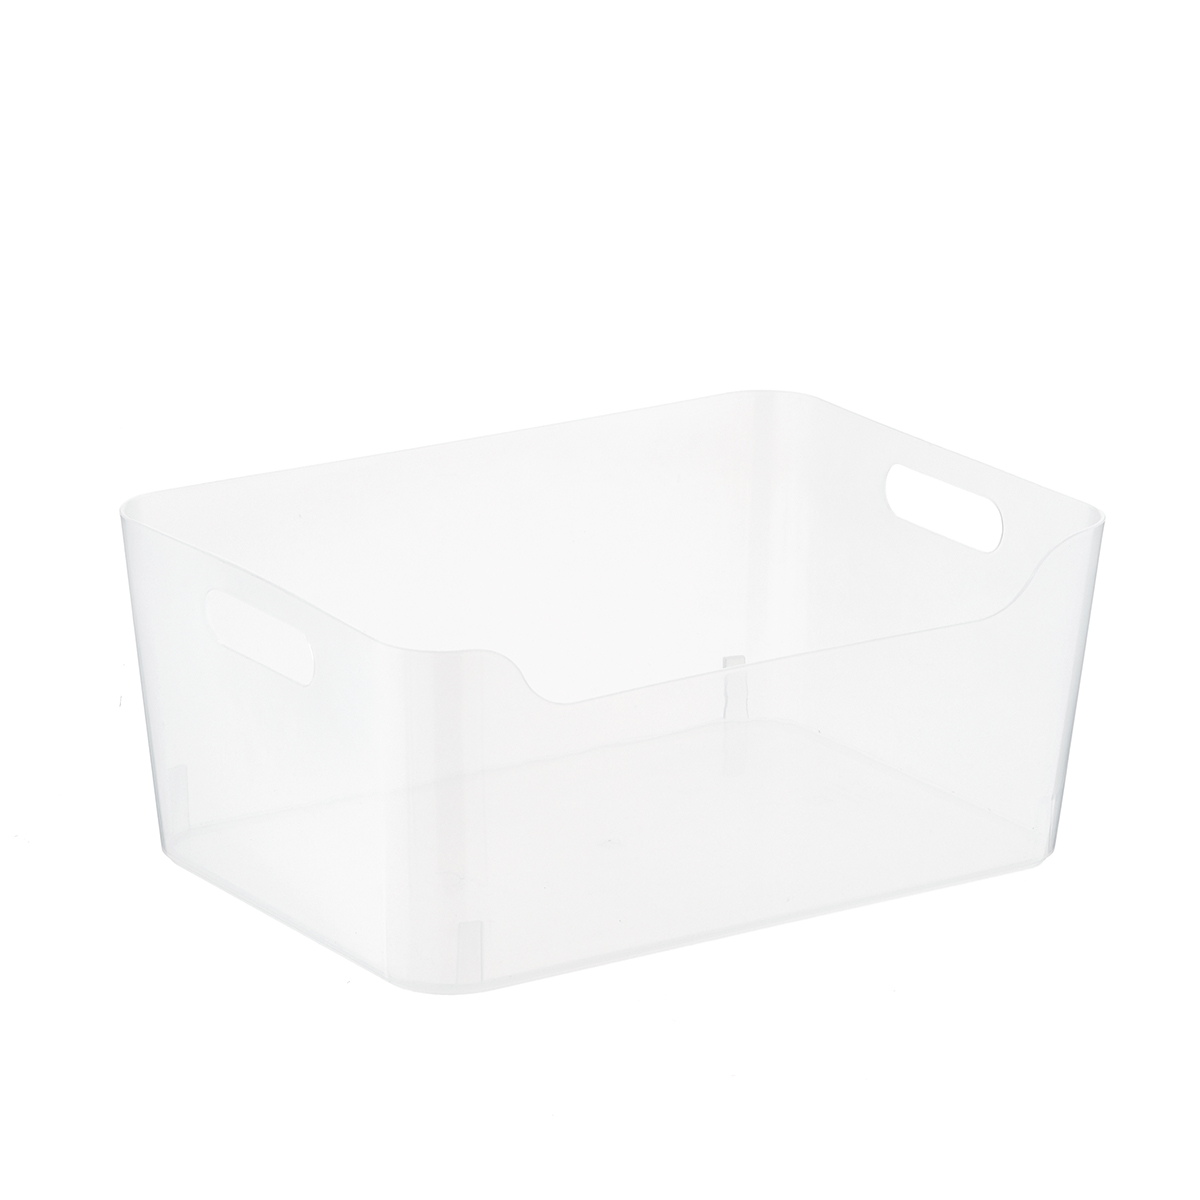 https://images.containerstore.com/catalogimages/339922/10073990-plastic-storage-bin-with-ha.jpg